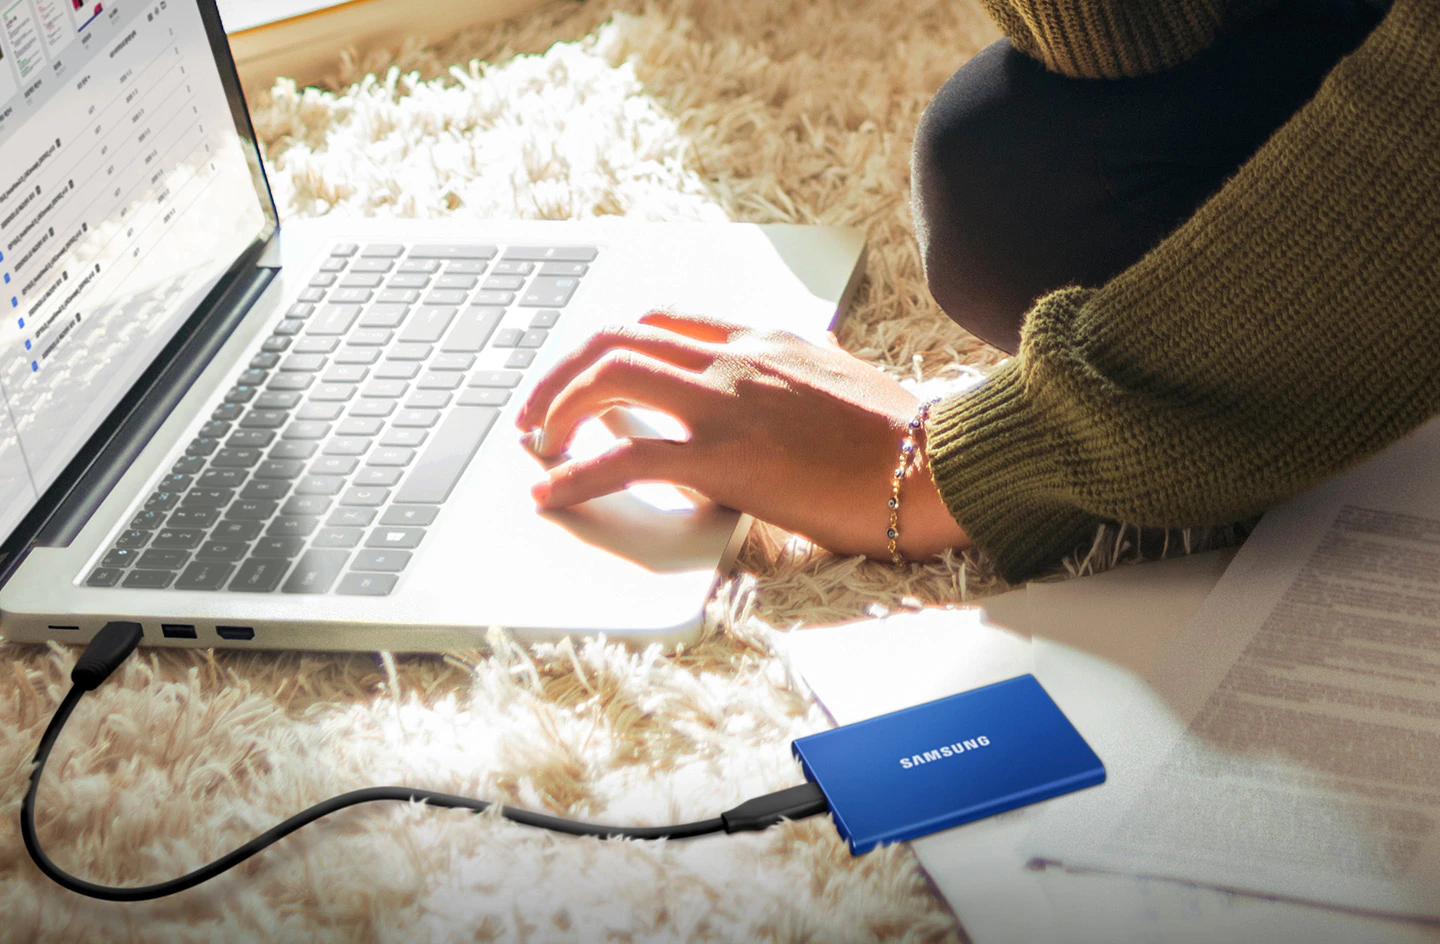 A woman sits on carpeted floor using laptop touchpad with Samsung T7 SSD attached.